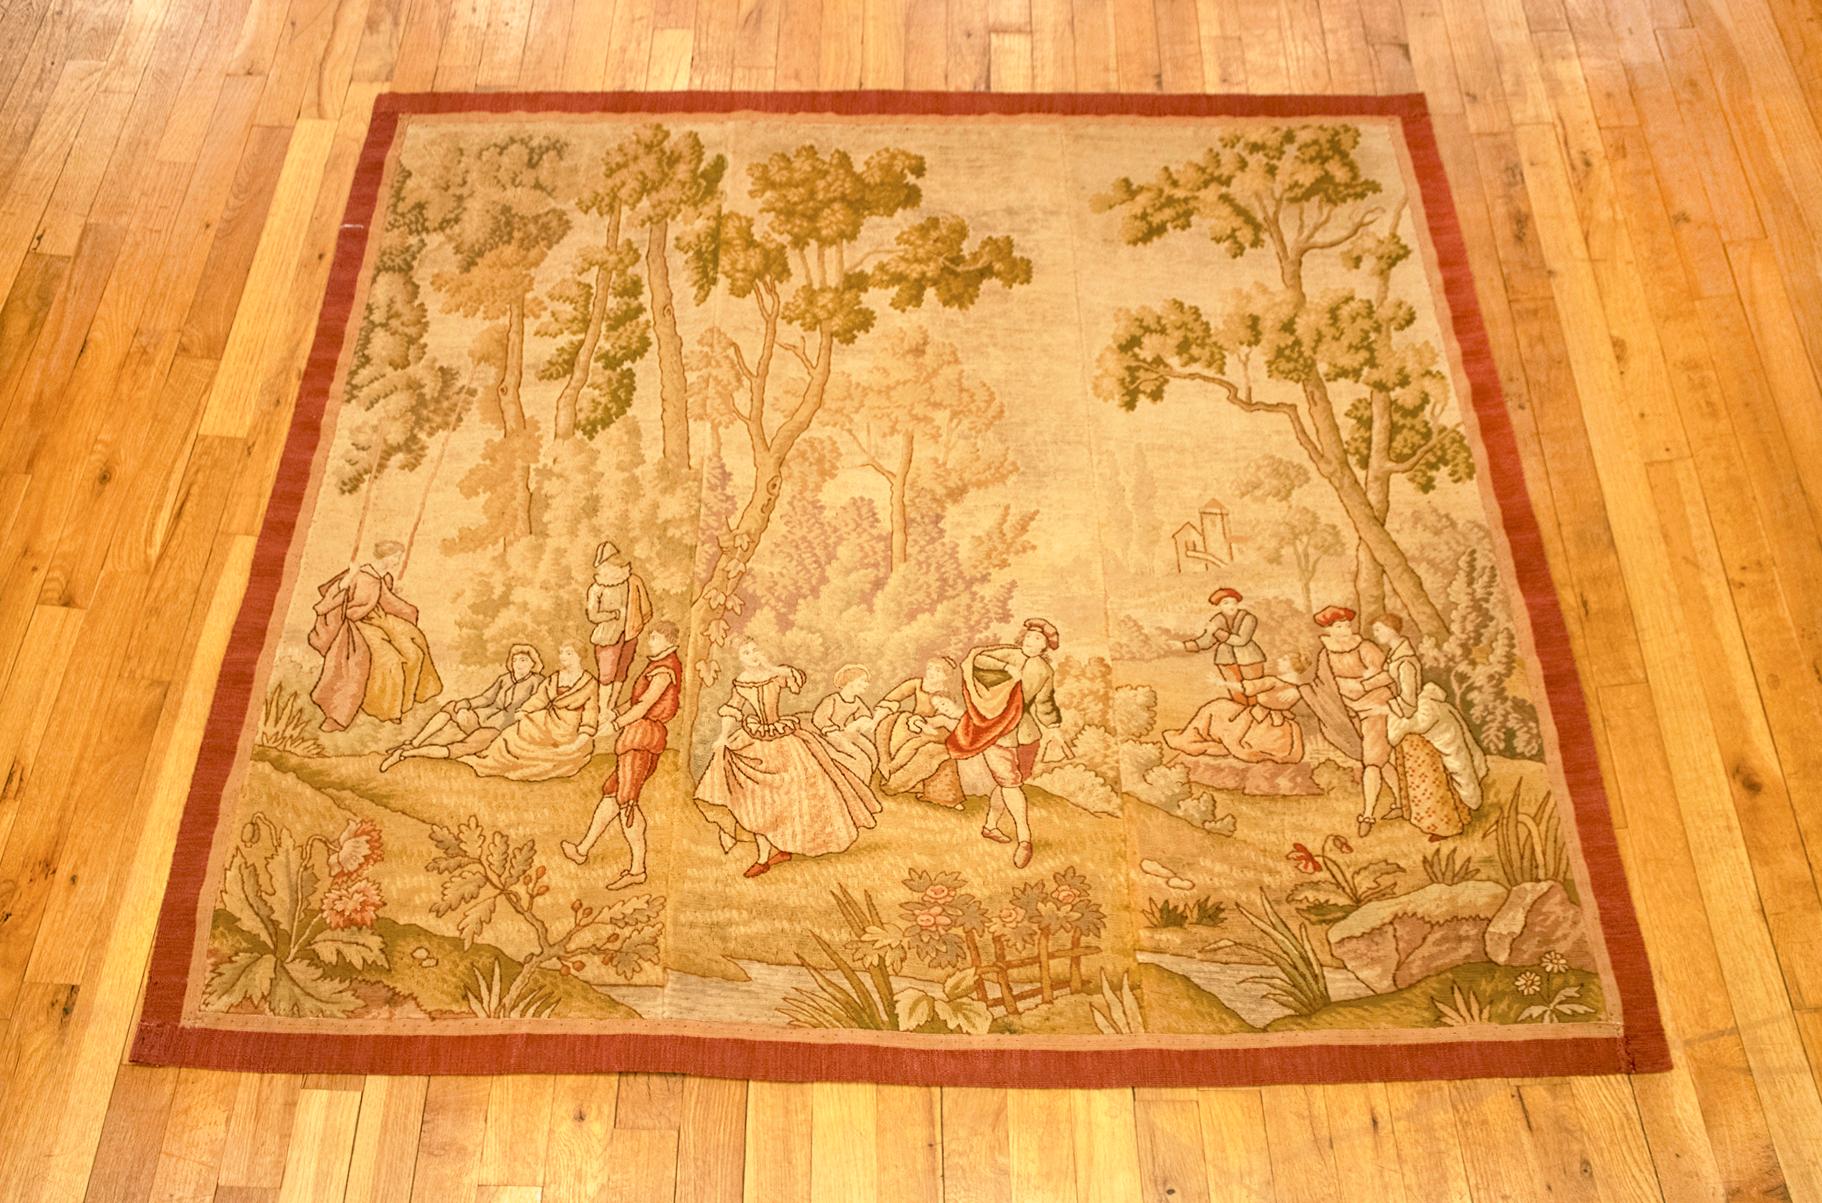 Antique European Needlepoint Tapestry Panels with Courtiers Reveling, circa 1900

An interconnected set of three European Needlepoint Tapestry Panels, antique, circa 1900, size 4'5